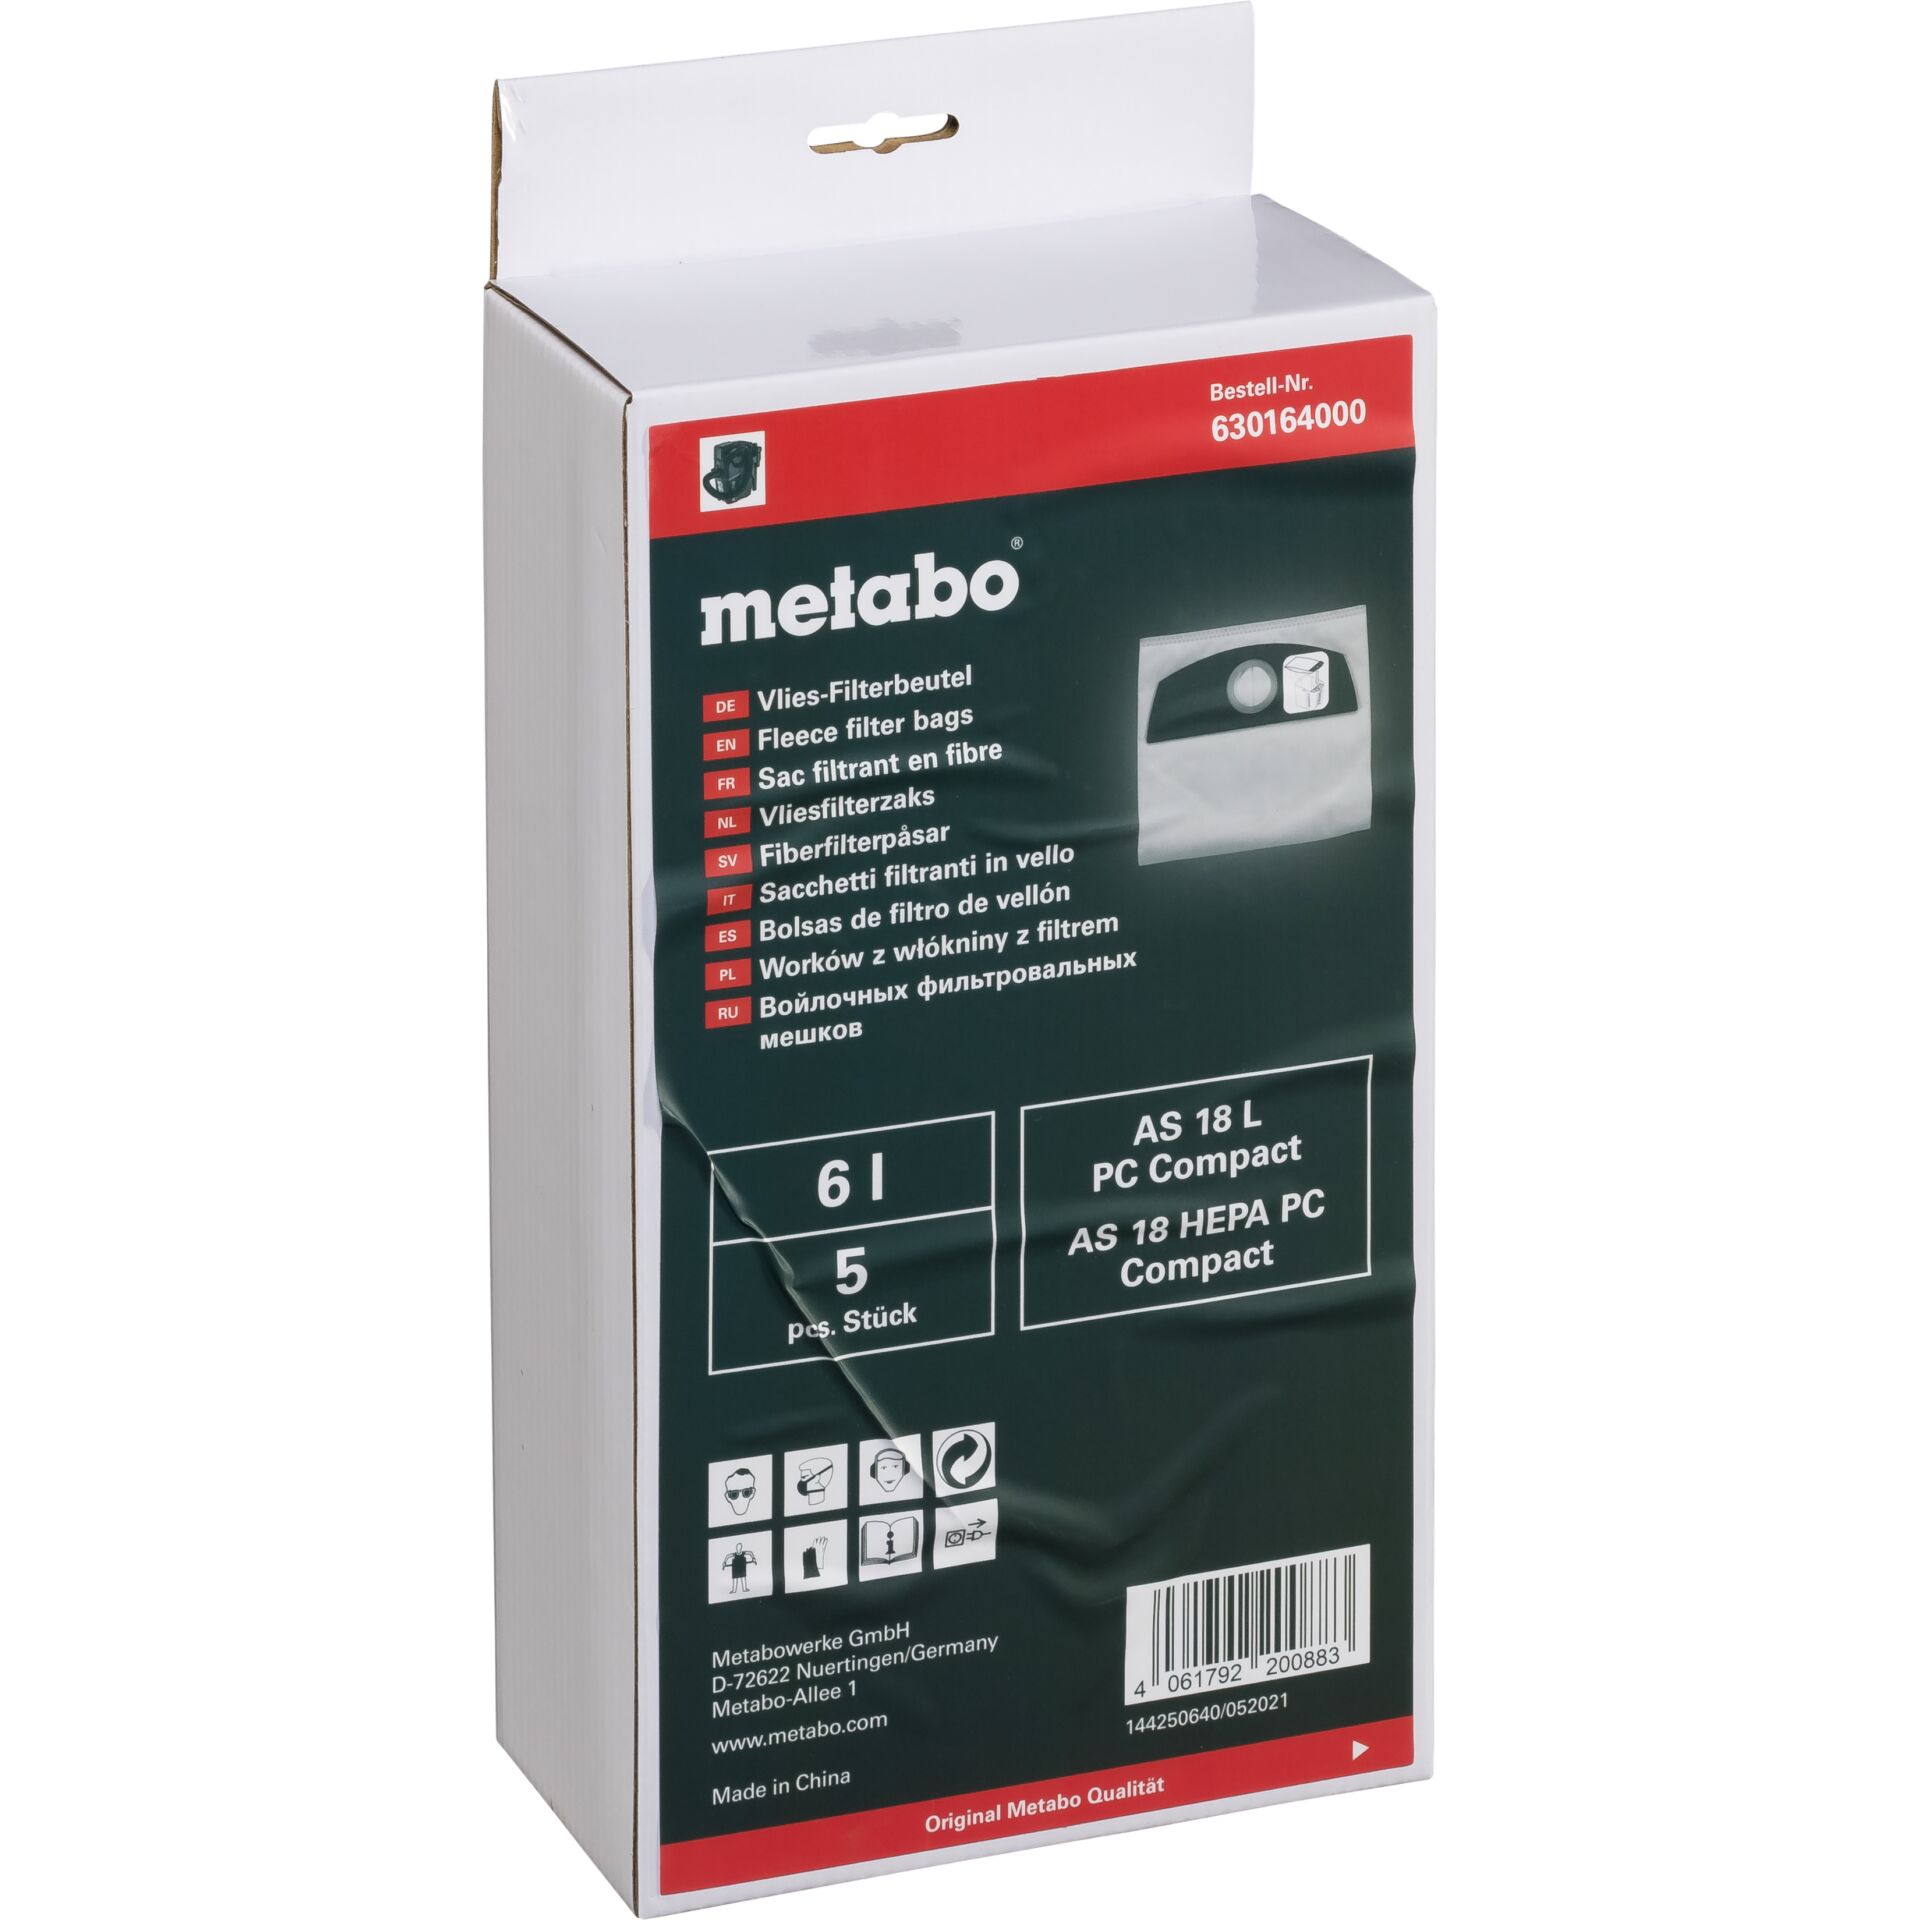 Metabo 5 sacchetto pile 6 l,AS 18l PC Compact